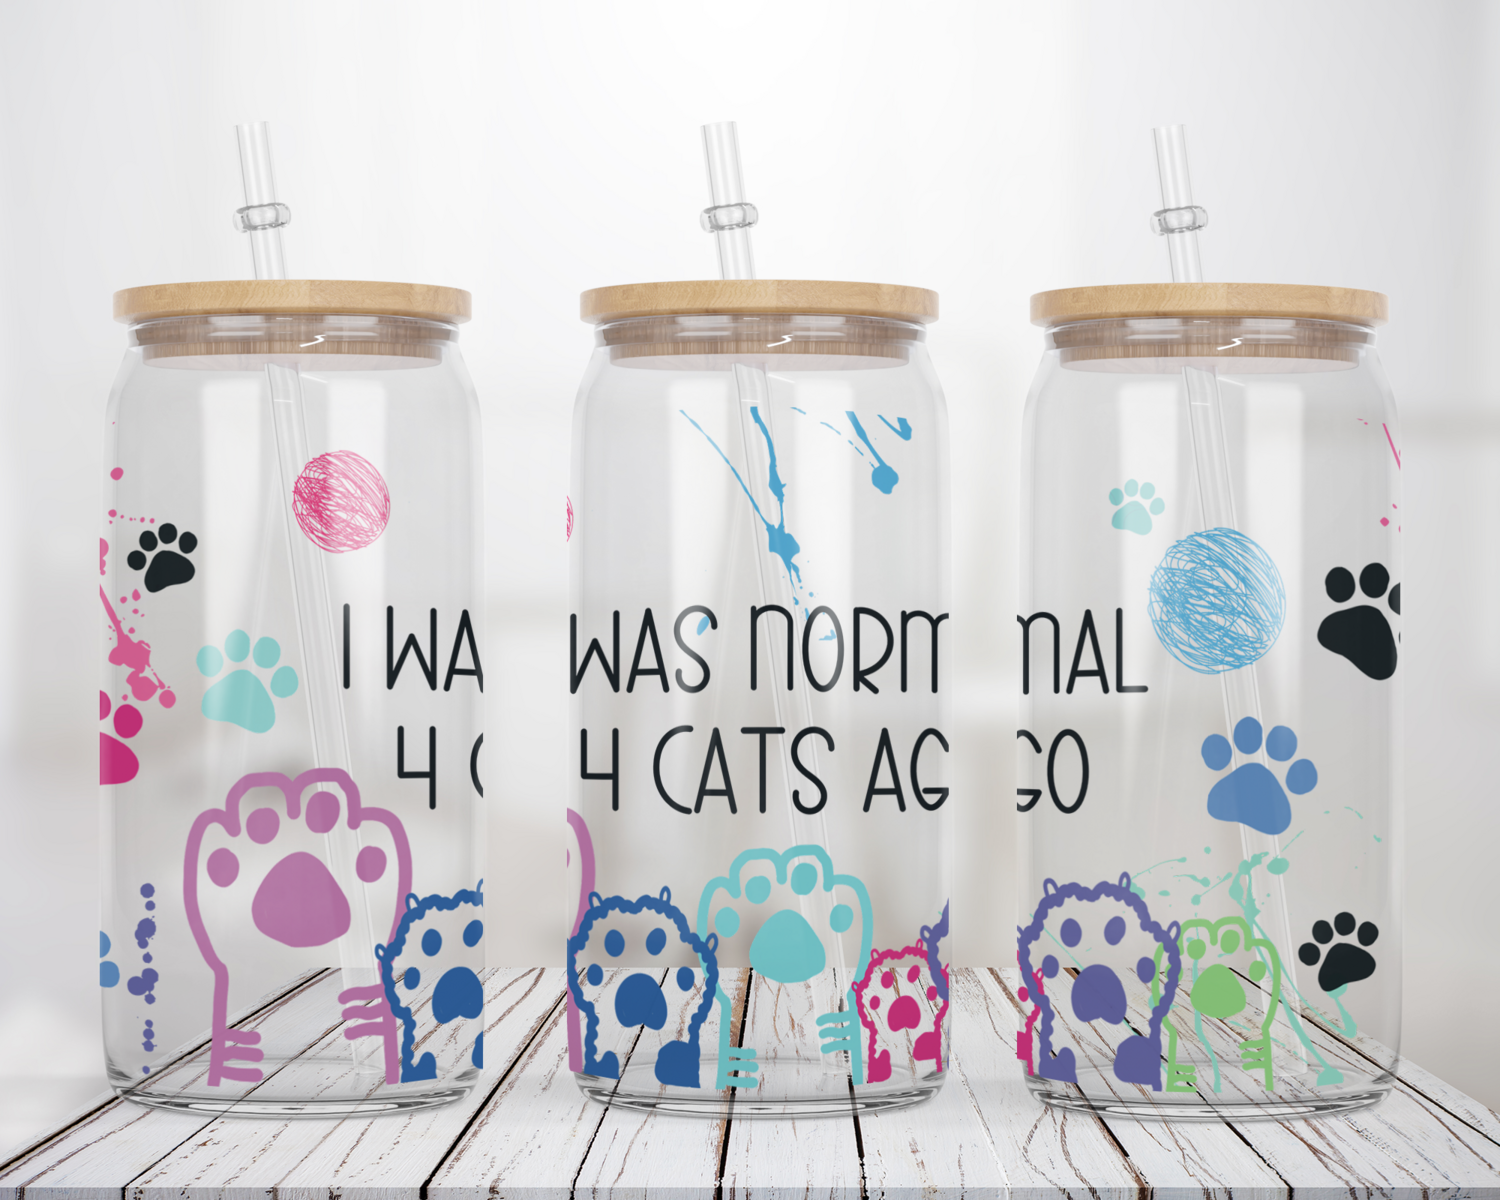 4 Cats Ago  -  Glass Can